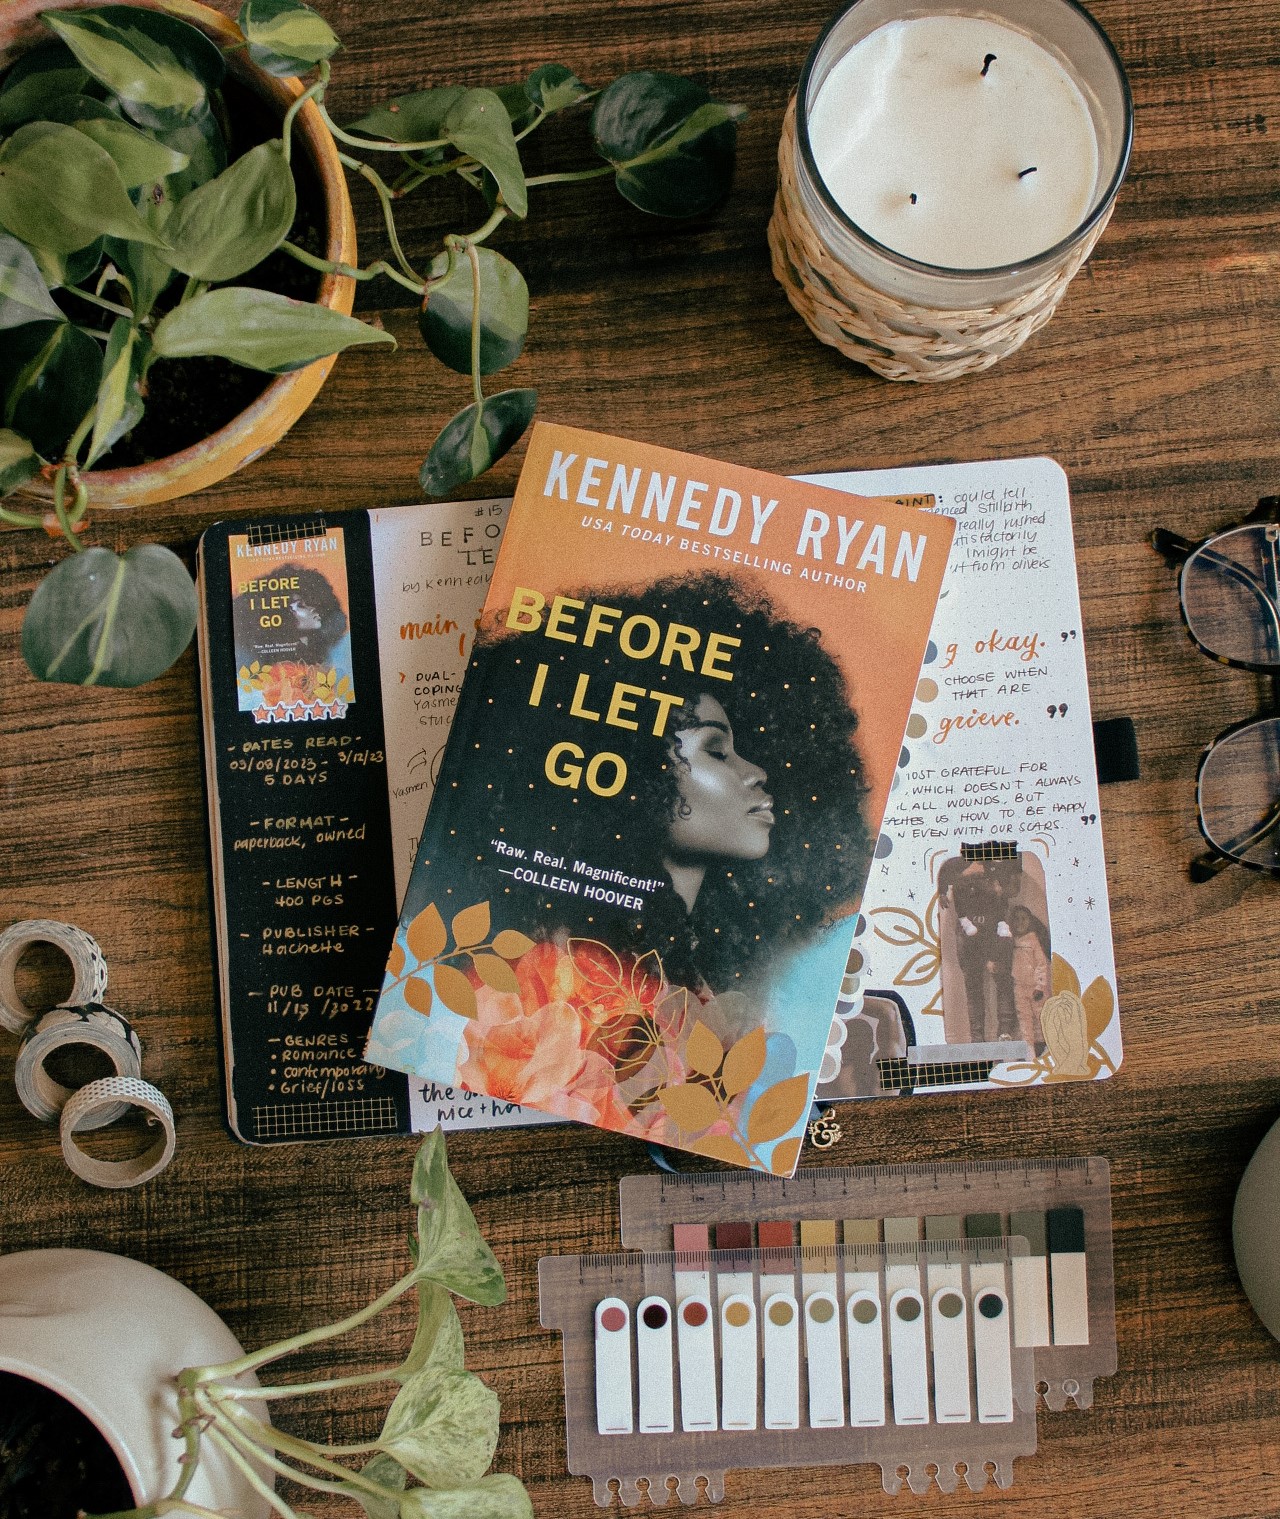 A paperback copy of the book Before I Let Go by Kennedy Ryan is on top of a reading journal spread about the book. The journal and book are on a wood desk surrounded by plants and stationery items.